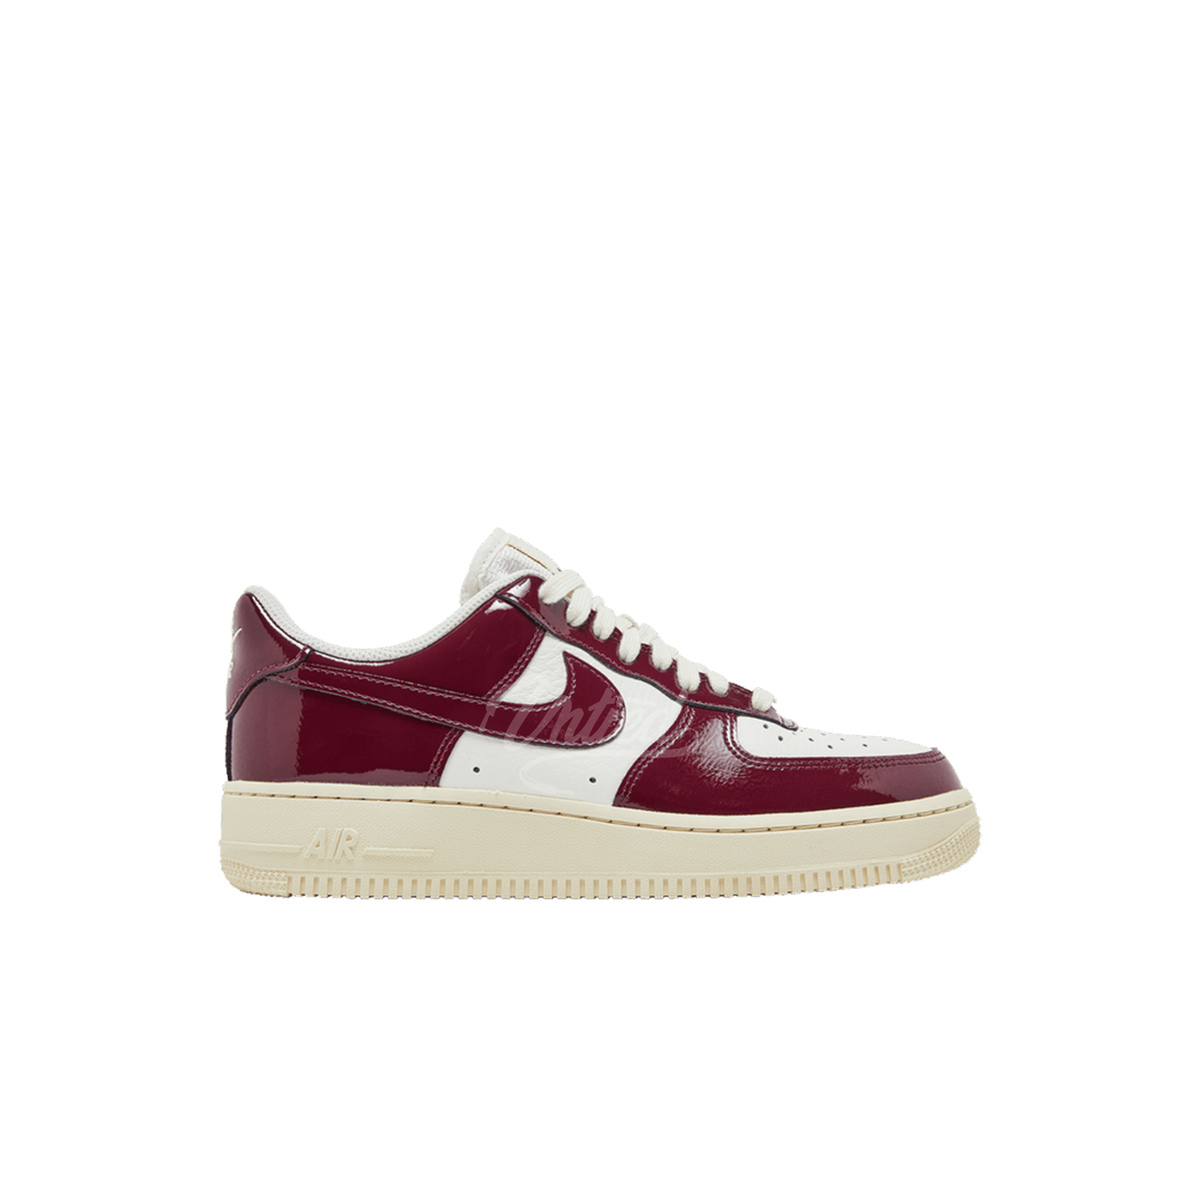 Nike Air Force 1 Low "Dark Beetroot Patent Leather" (W)